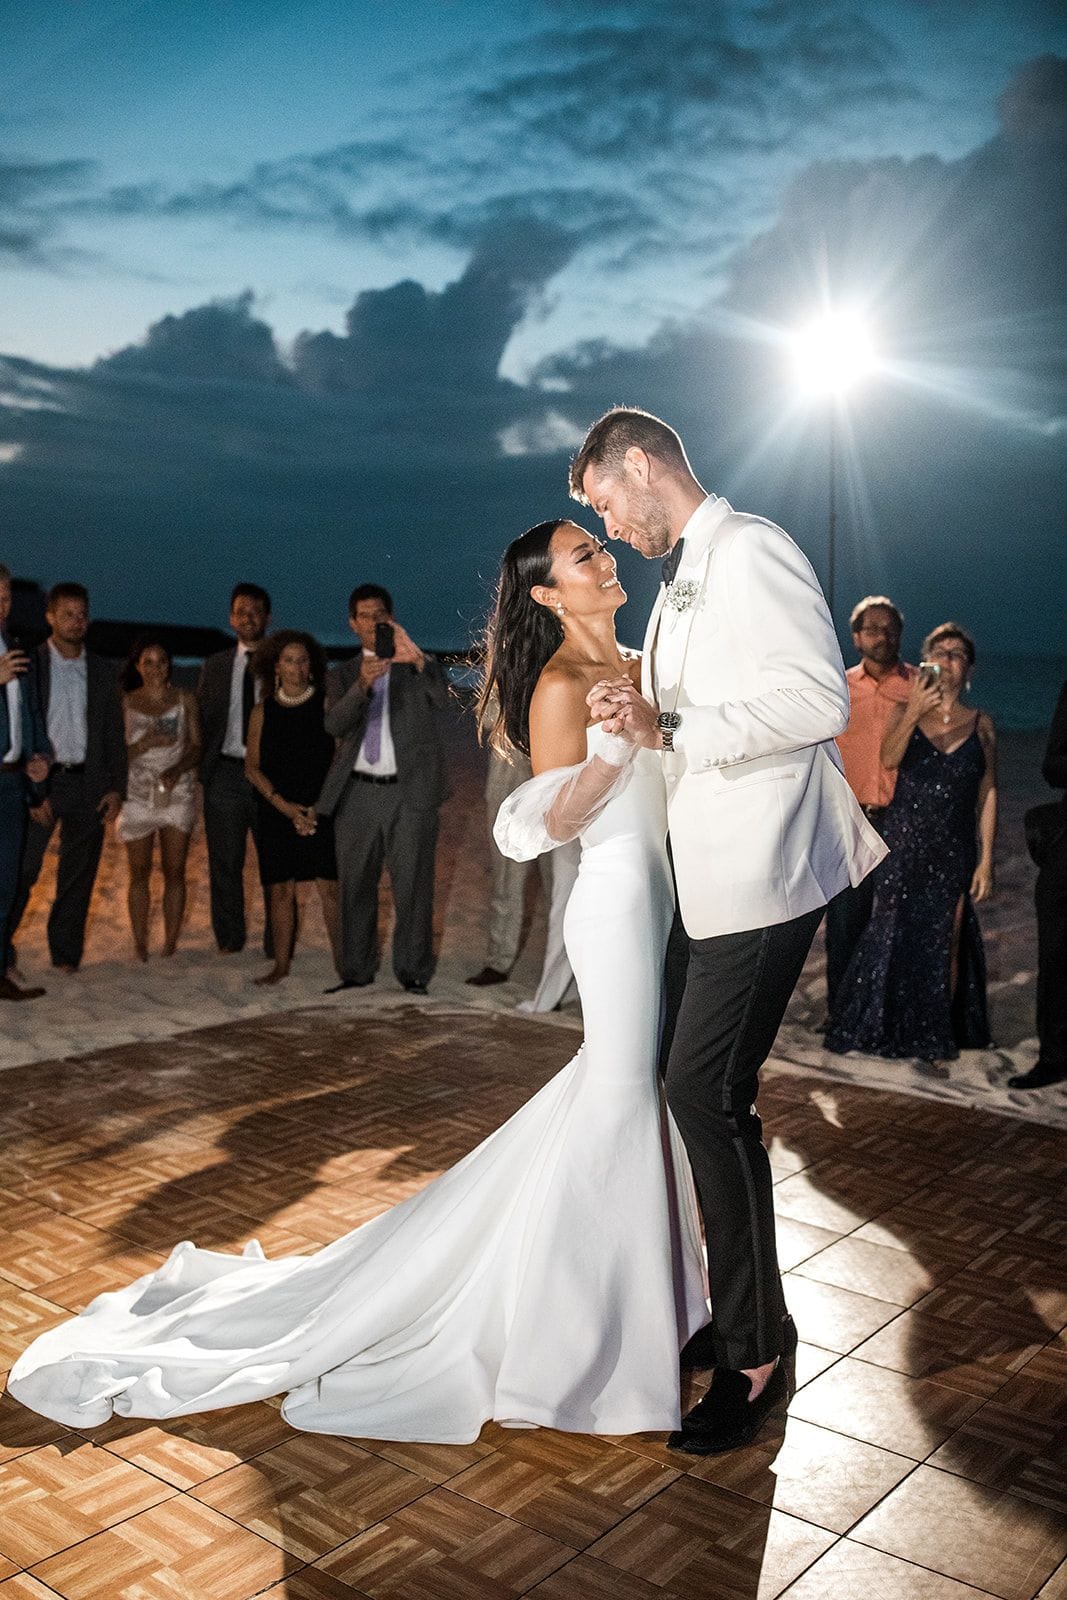 Bride and groom share first dance at Anguilla wedding reception